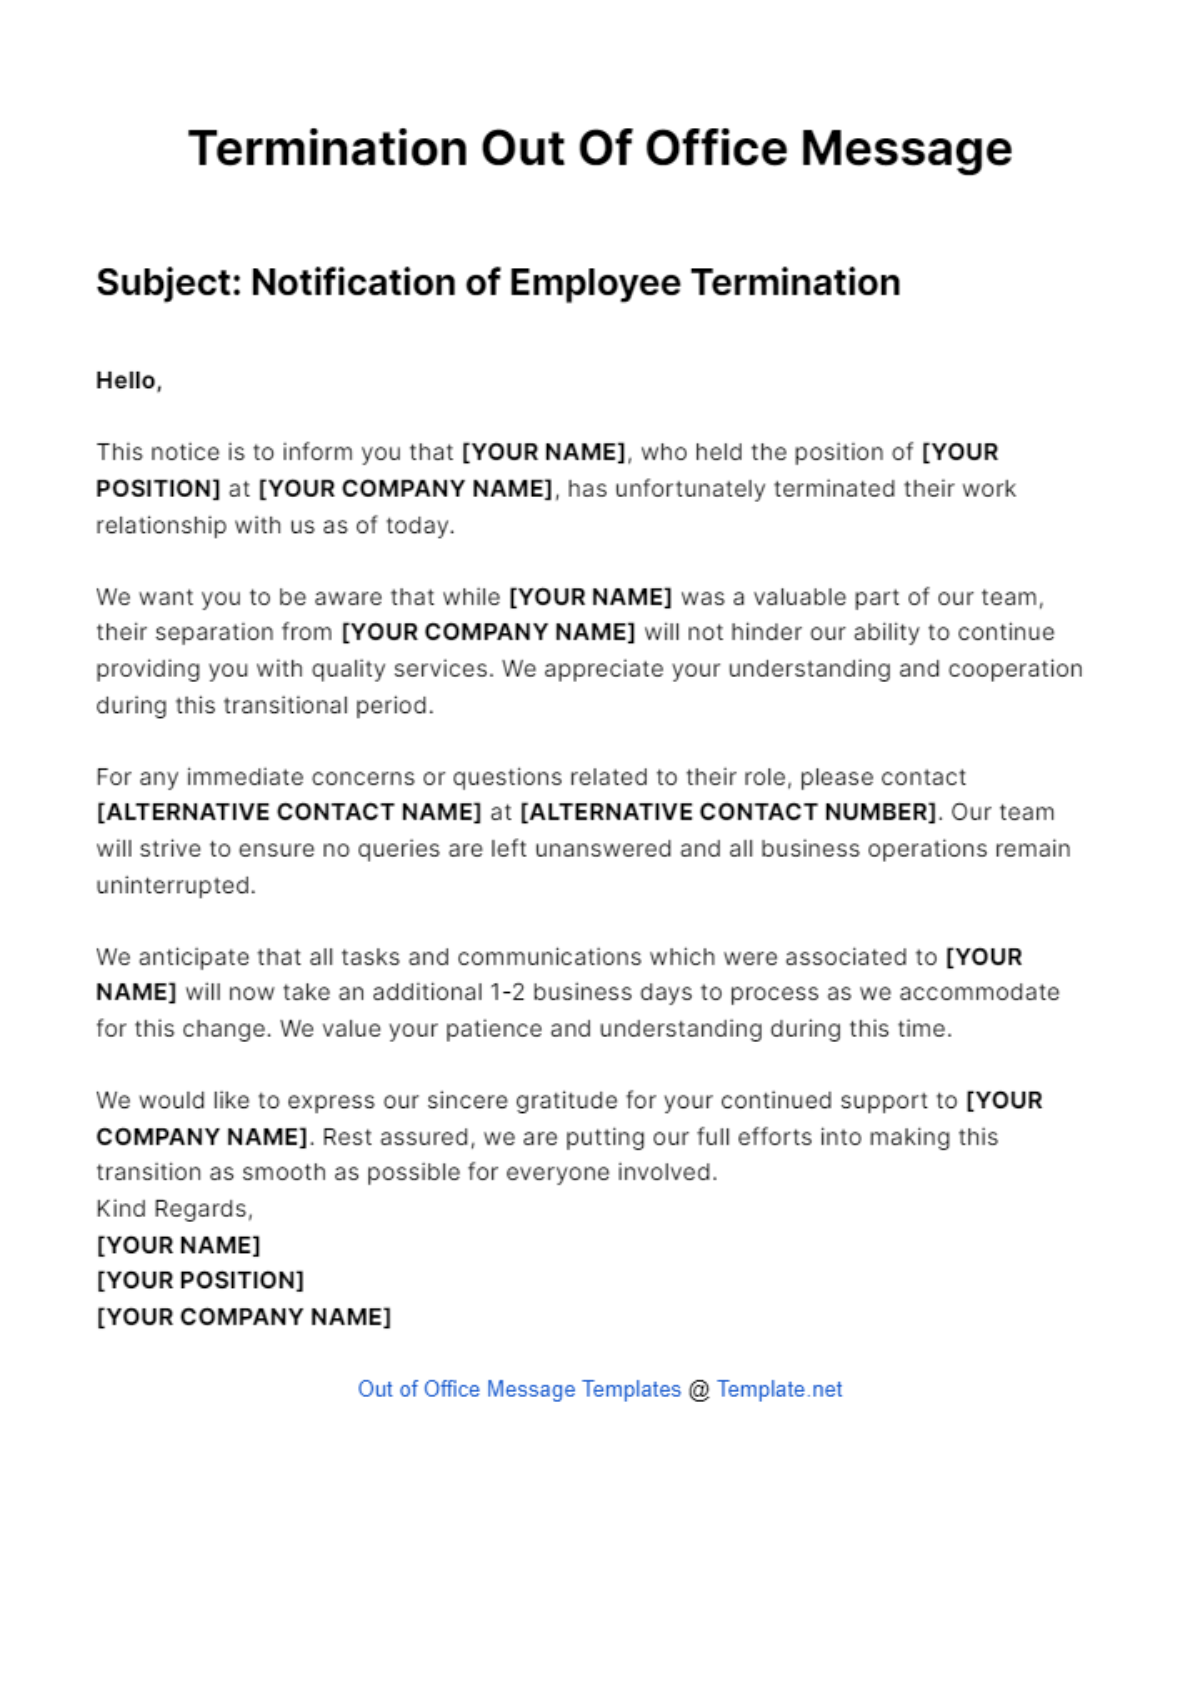 Termination Out Of Office Message Template